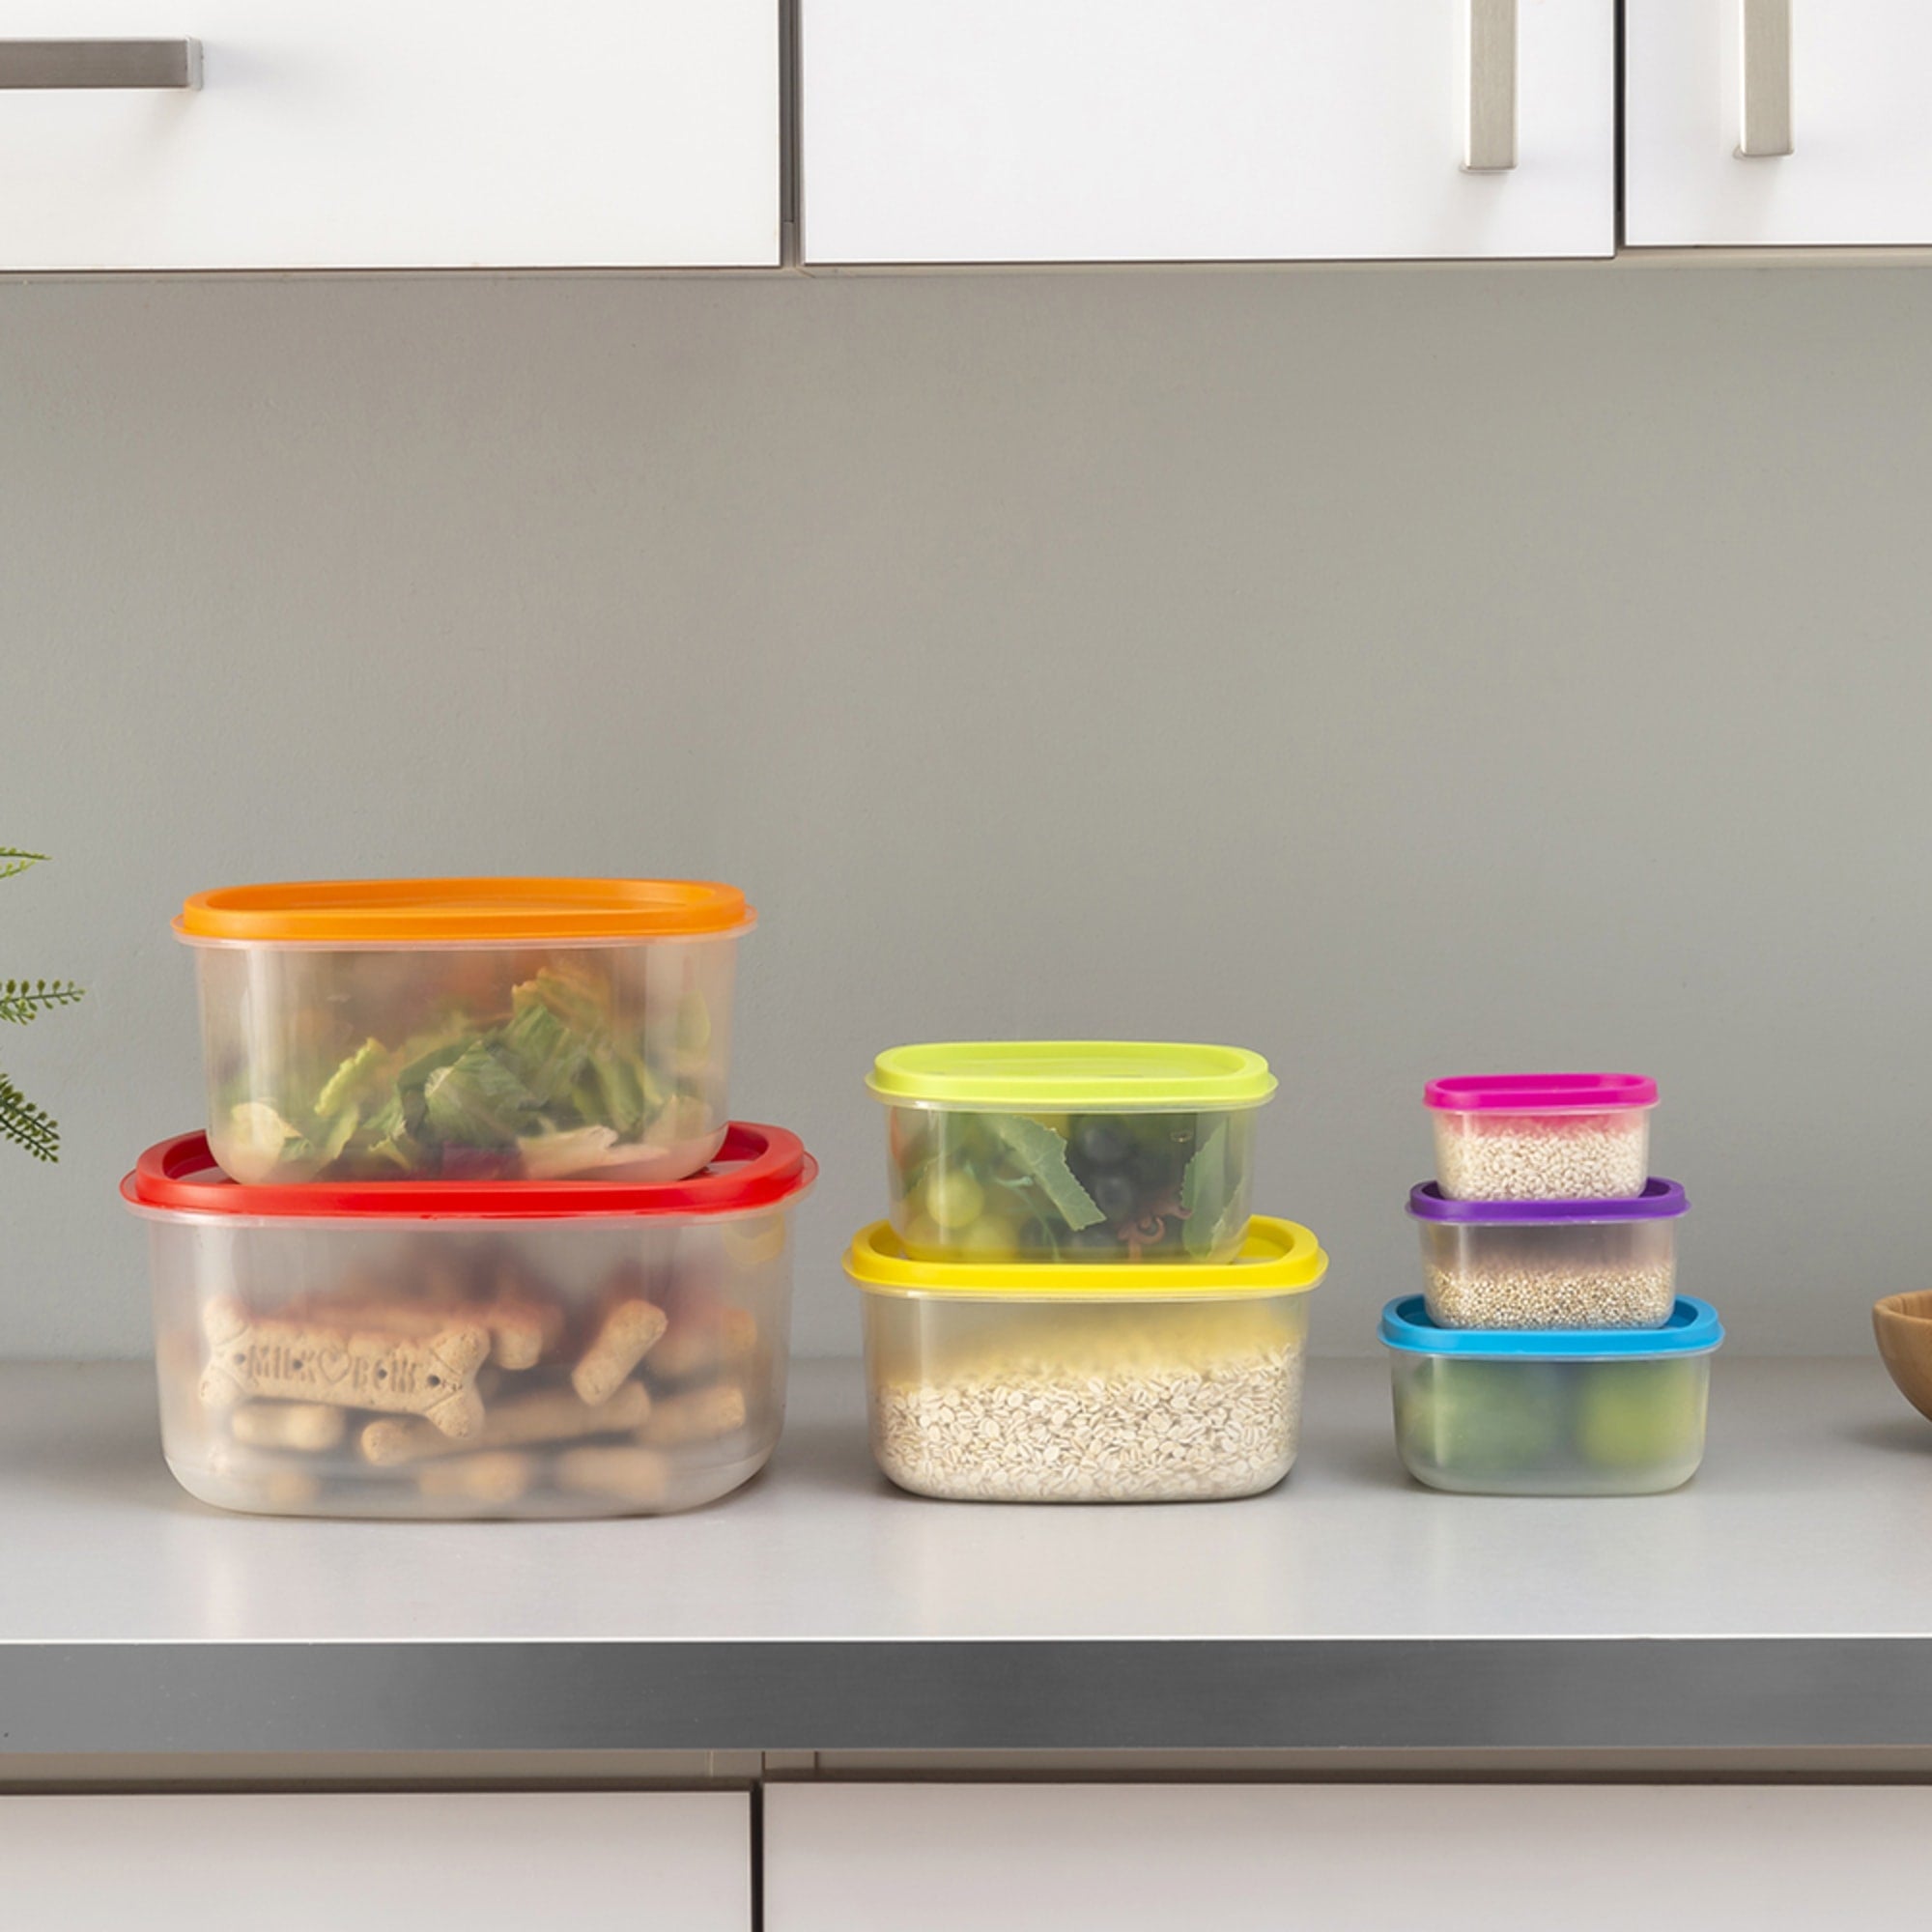 Home Basics 7 Piece Container Set with Lid $5.00 EACH, CASE PACK OF 12